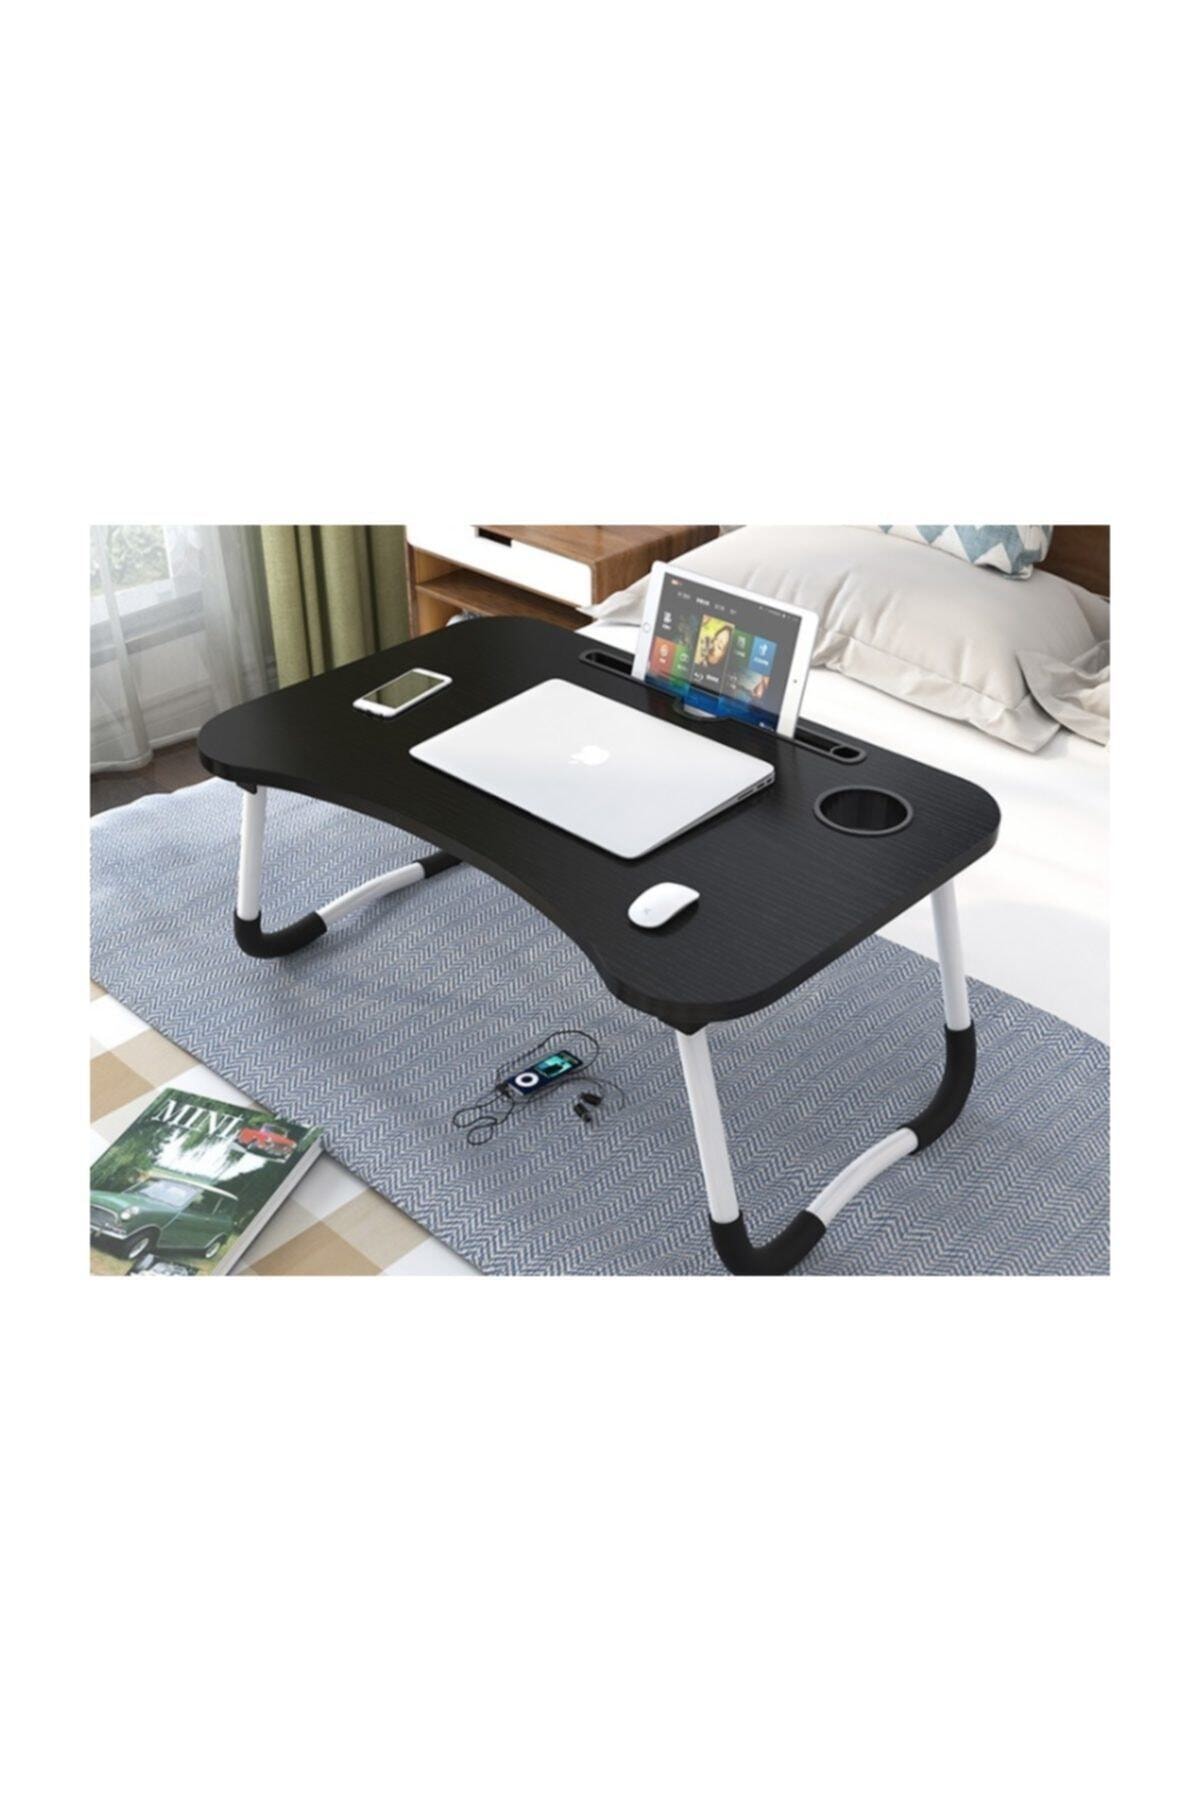 Portable Bed Desk for Laptop Tray Table for Eating and Writing